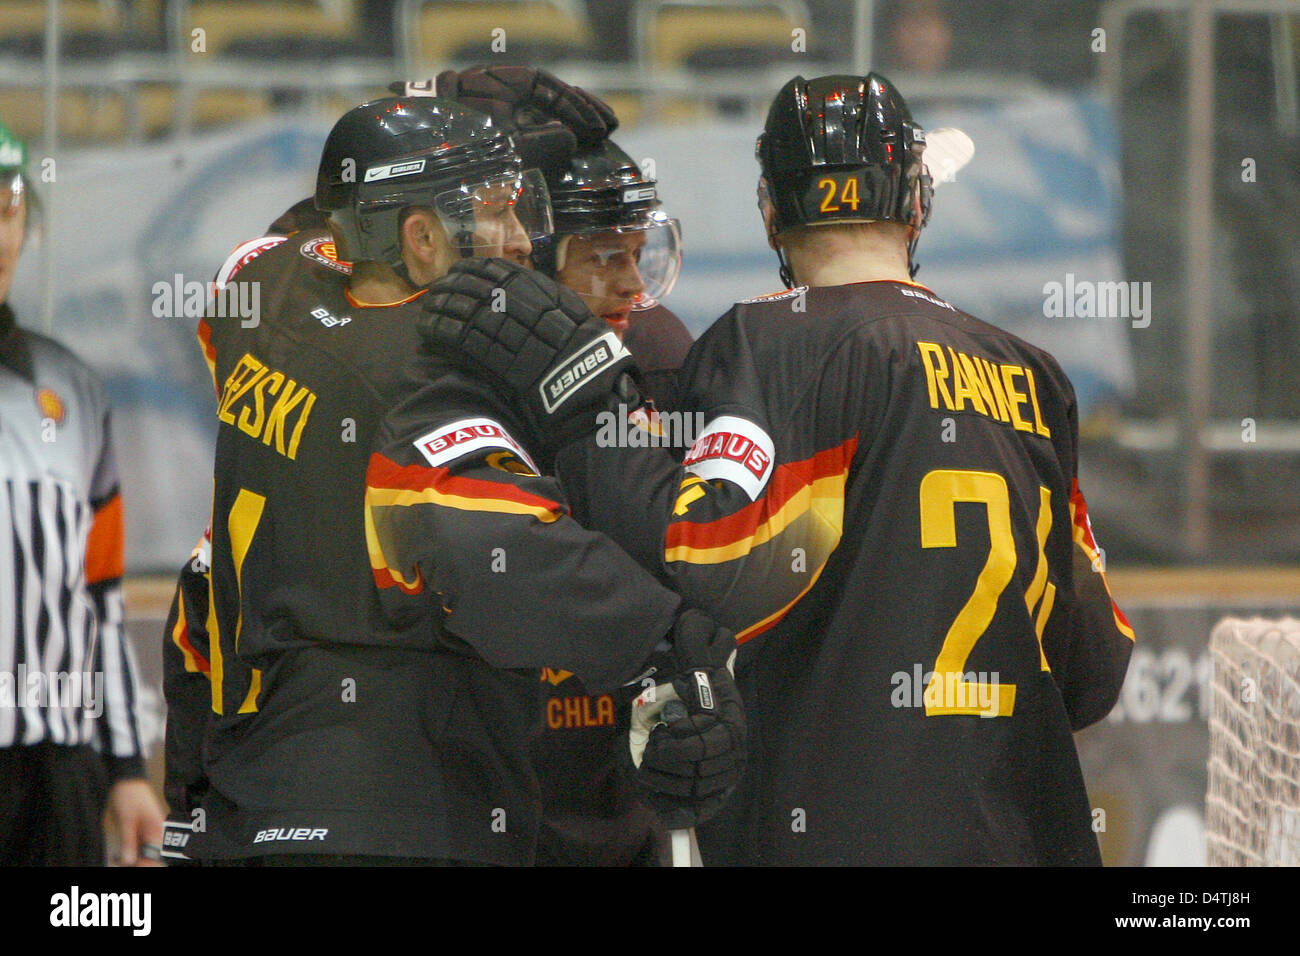 Germans Manuel Klinge (C) celebrates his 2-0 score with teammates Sven Felski (L) and Andre Rankel during the German Cup ice hockey match Germany vs Switzerland at Olympiahalle in Munich, Germany, 08 November 2009. Germany defeated Switzerland 5-1. Photo: Daniel Karmann Stock Photo